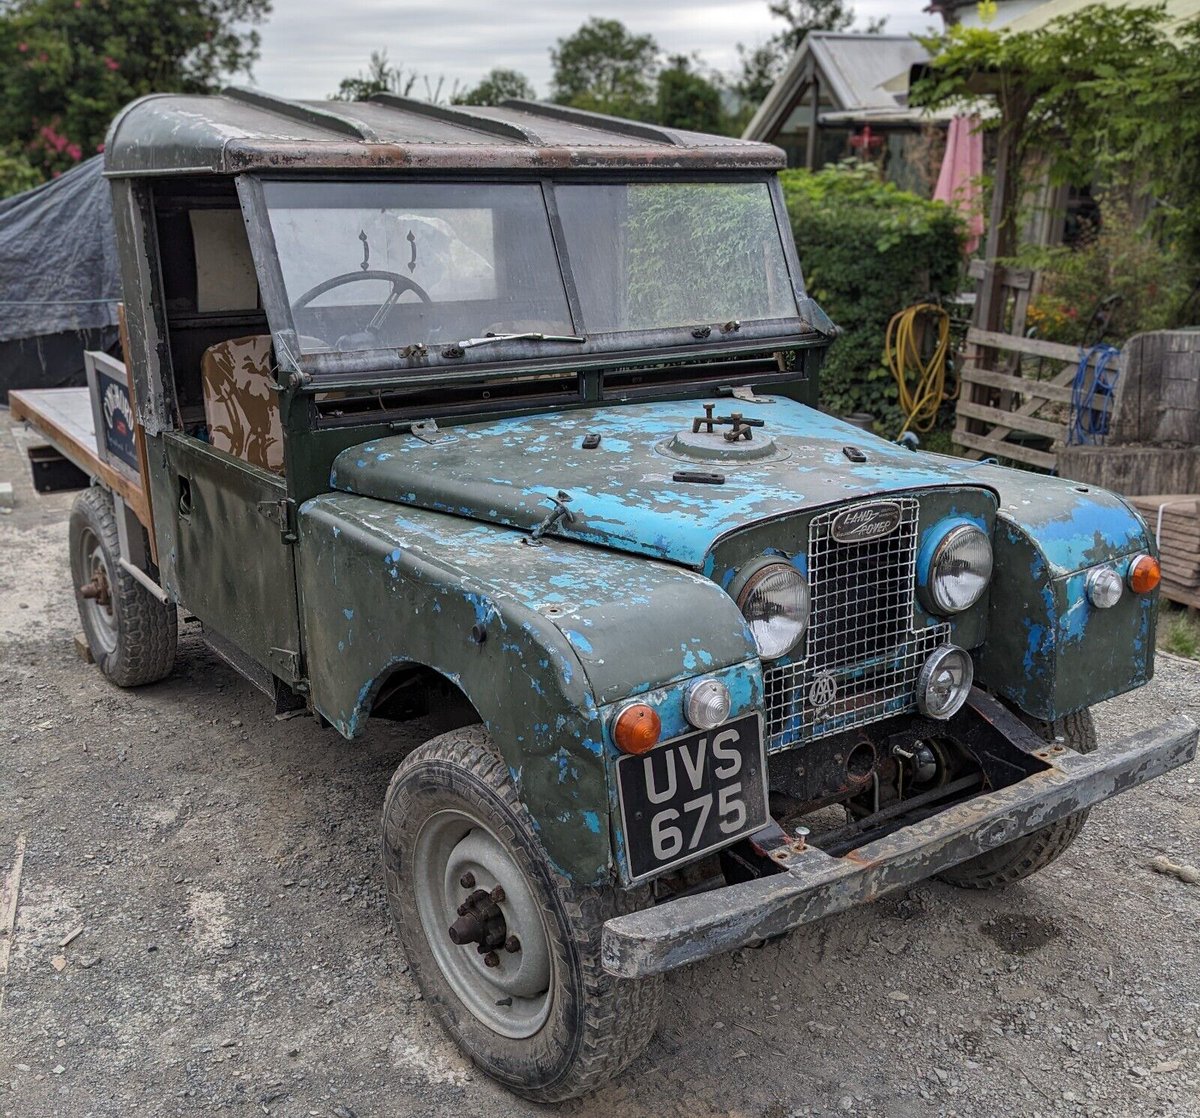 Ad - Land Rover Series 1
On eBay here -->> ow.ly/bffF50Px2xF

#projectcar #carproject #garagelife  #LandRoverSeries1 #ClassicCar #OffRoad #LandRoverForSale #LandRoverLove #LandRoverLife #LandRoverNation